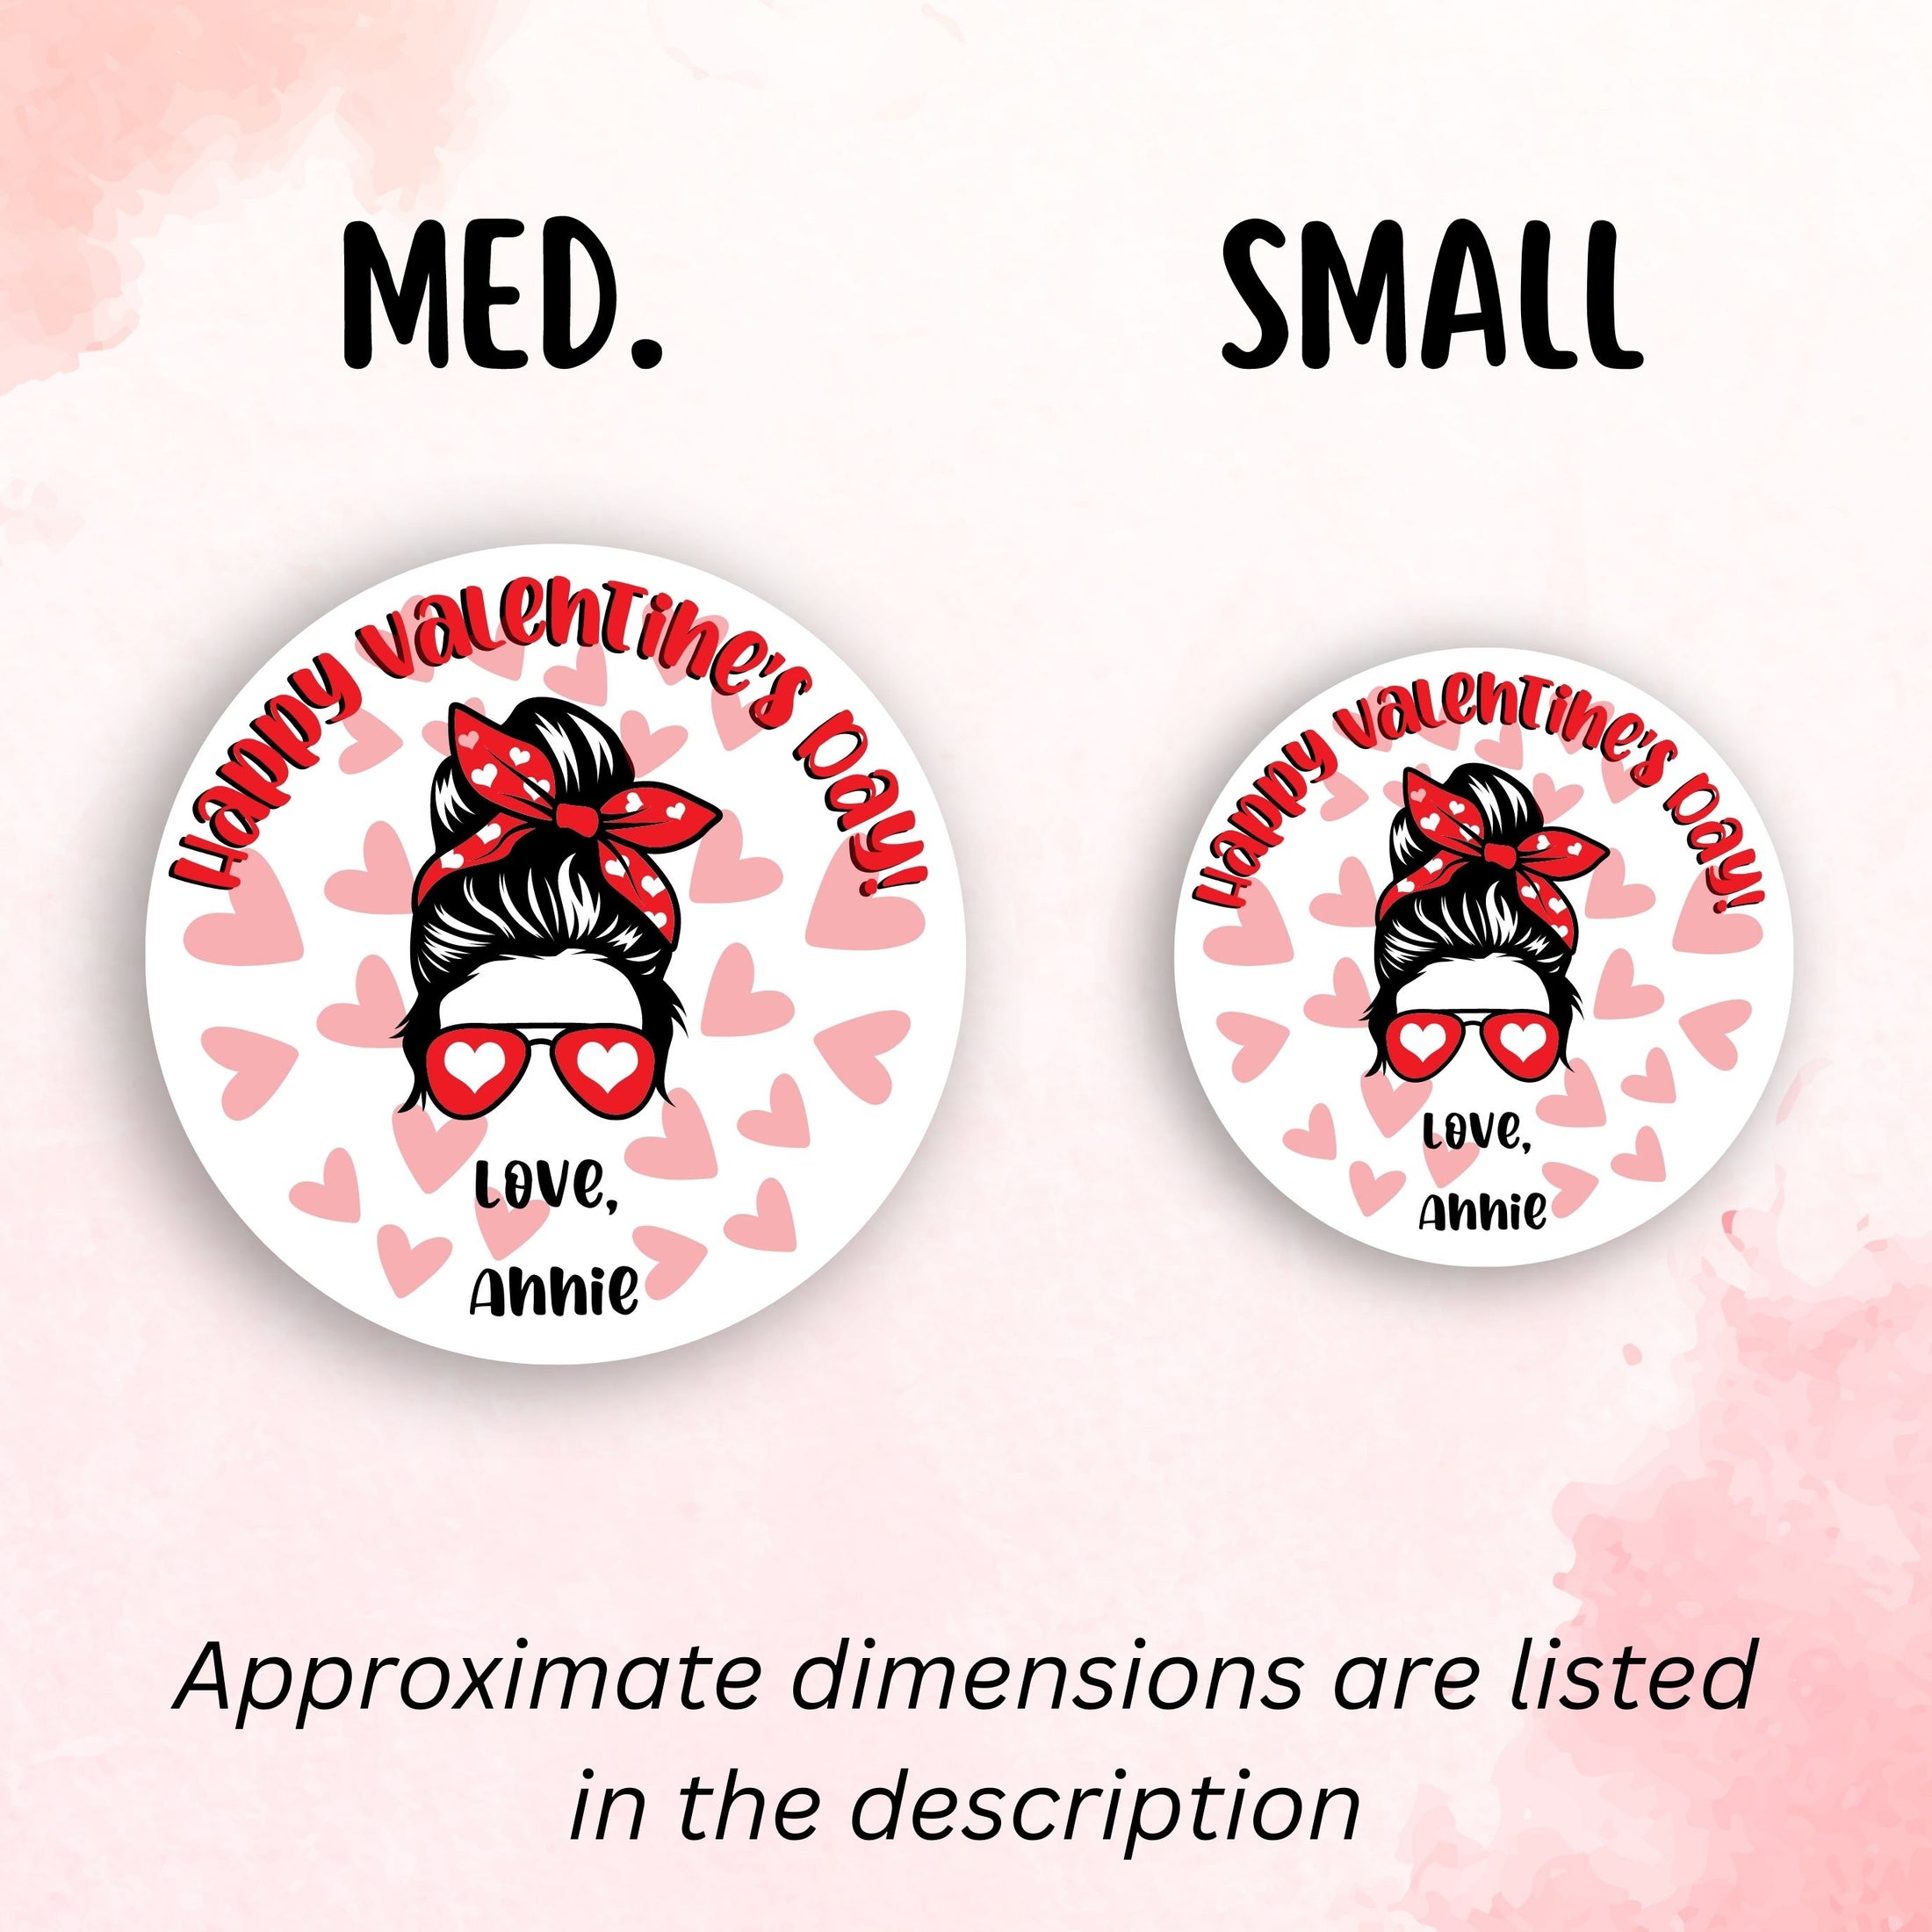 This image shows medium and small personalized valentine stickers next to each other as a size comparison.